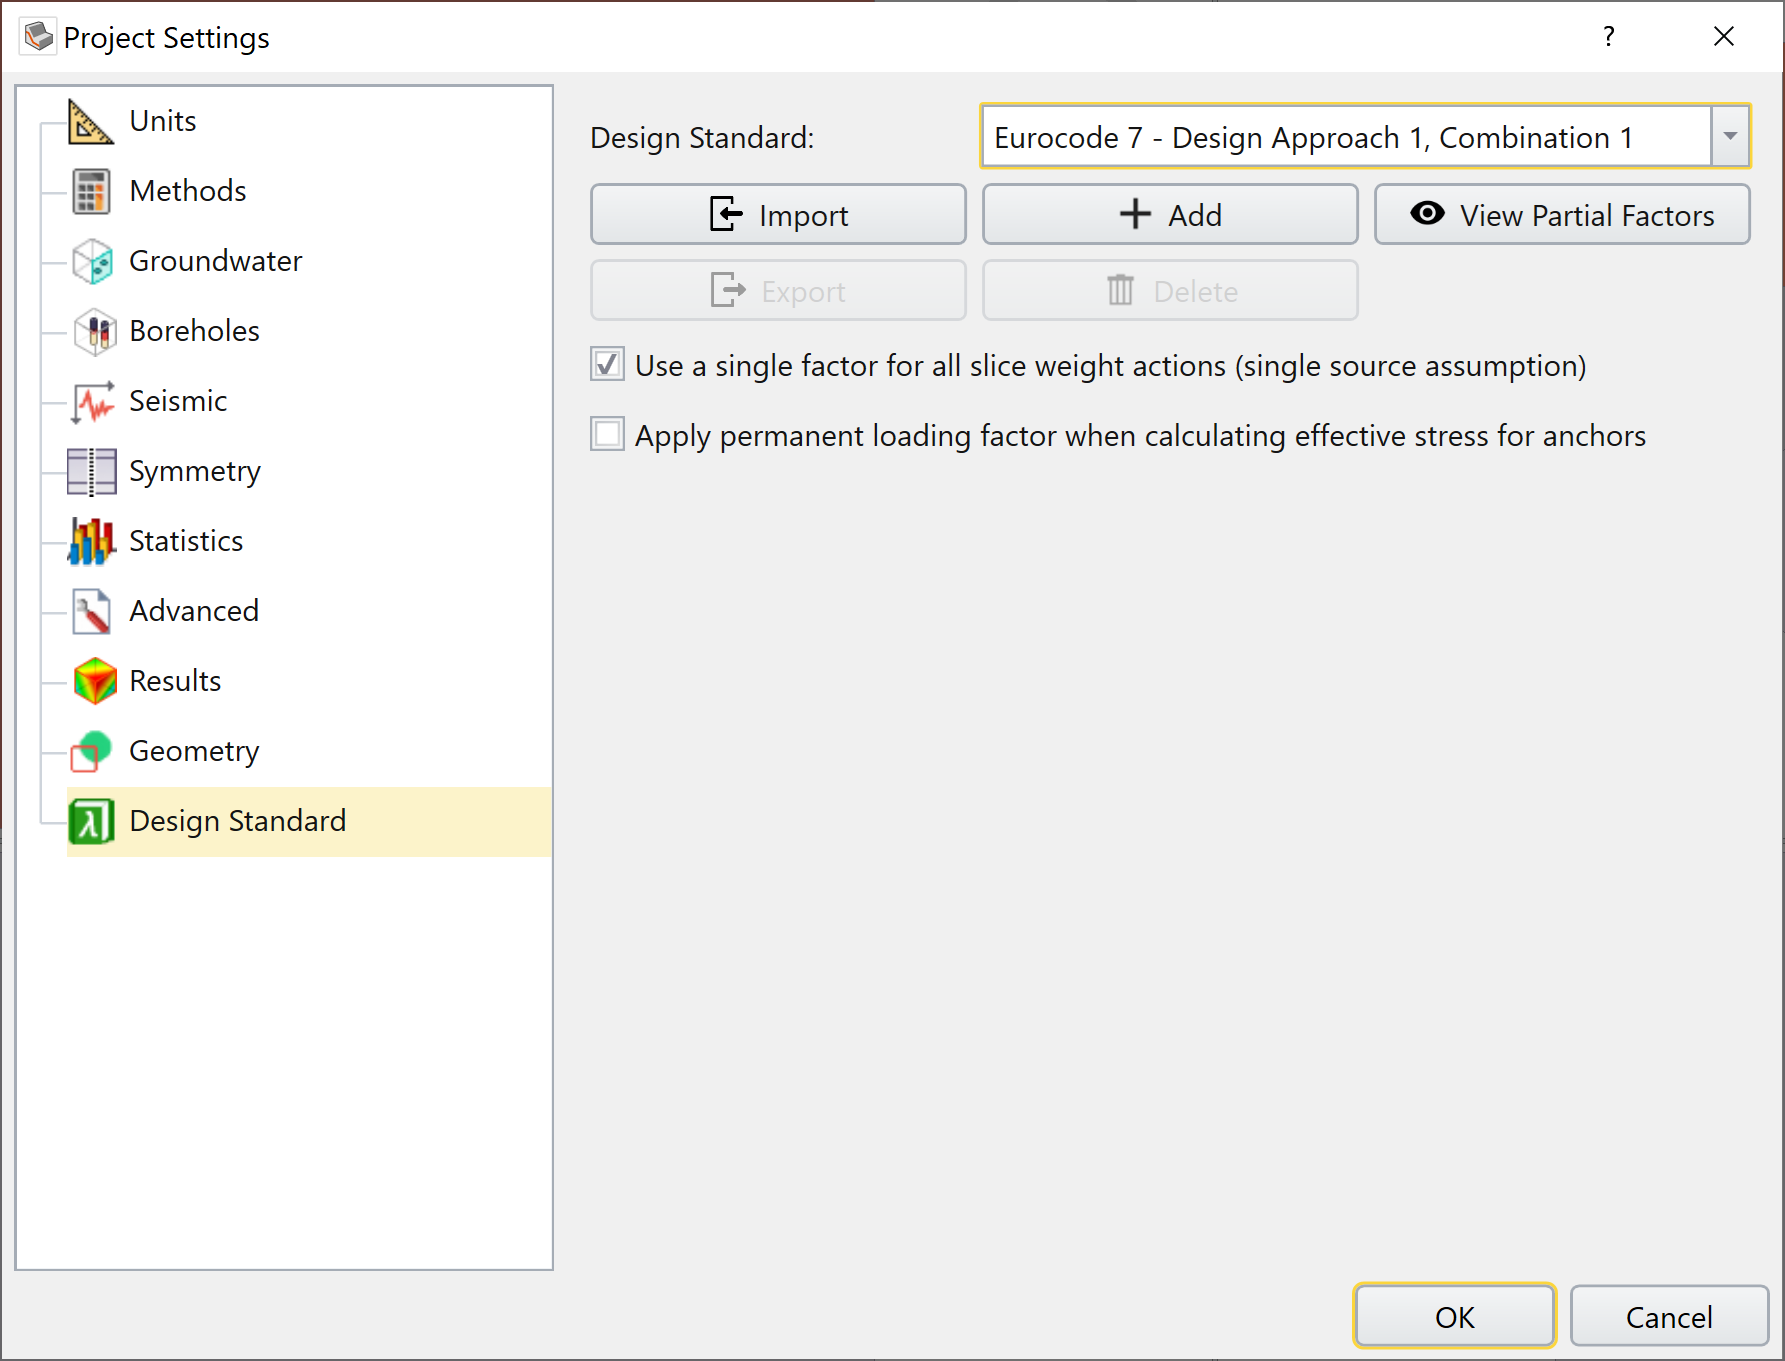 project settings - design standards tab with eurocode 7: approach 1 combination 1 selected